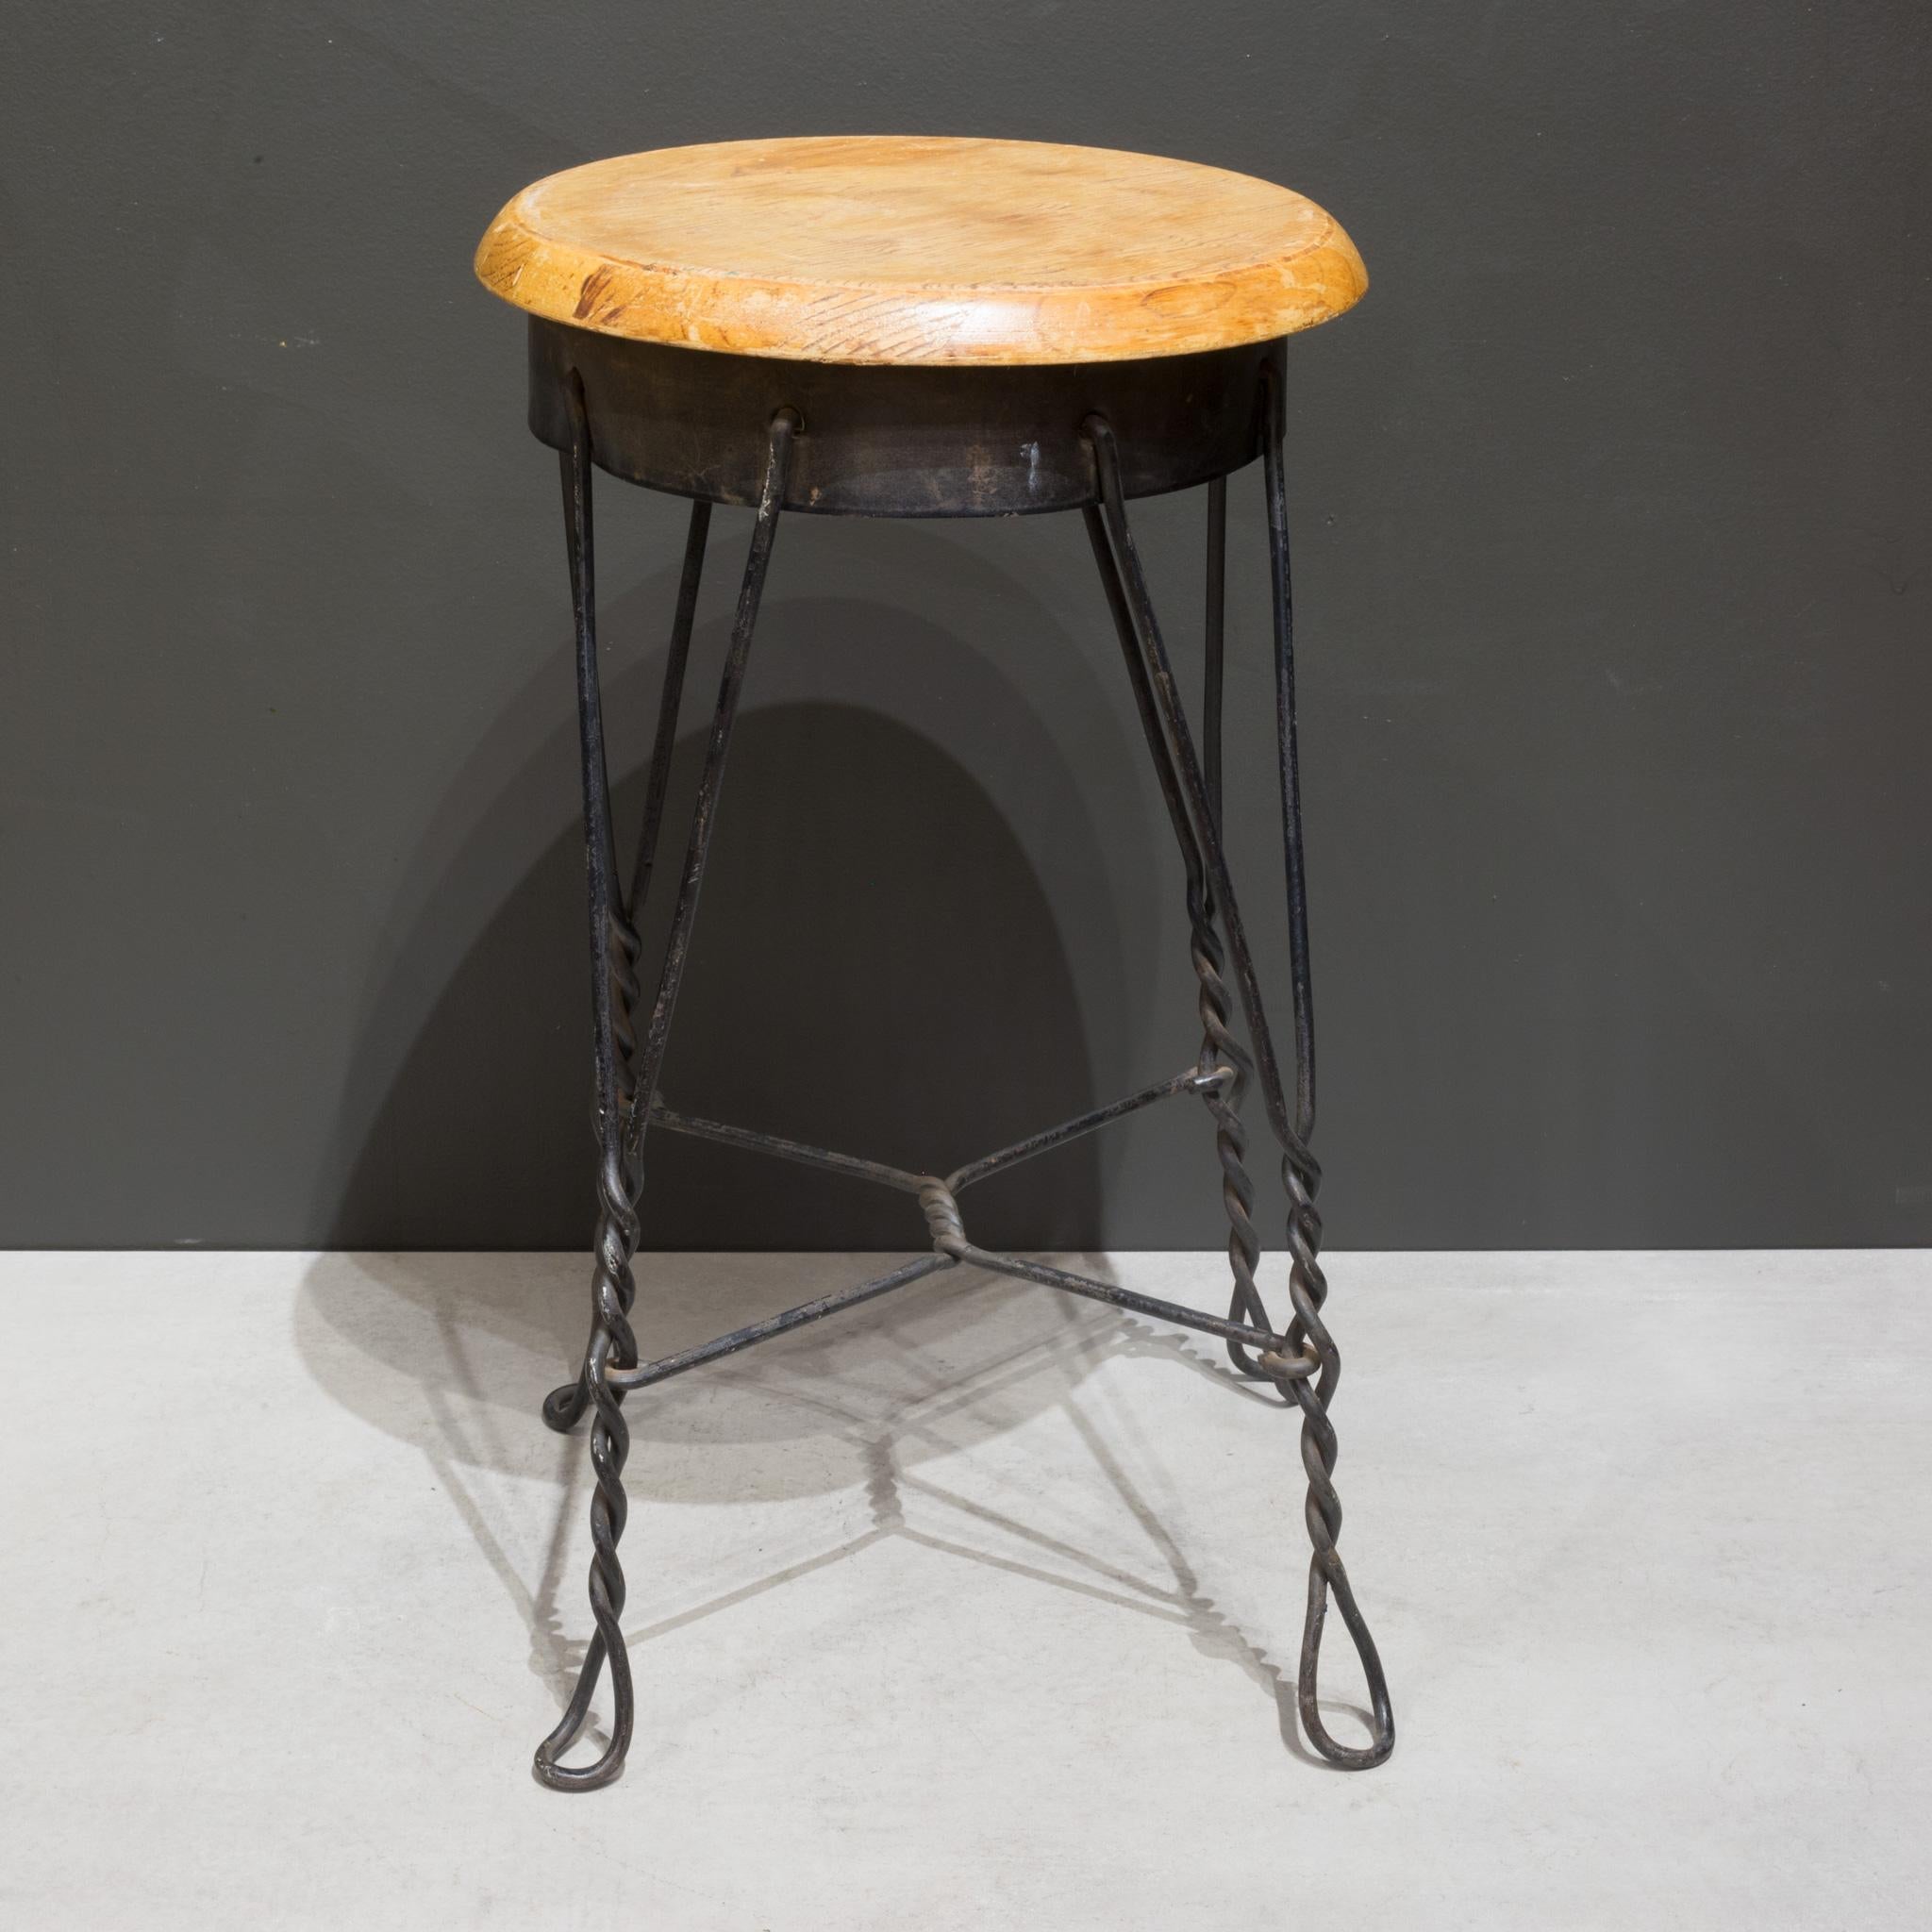 20th Century Early 20th C. Twisted Wire Fixed Small Stool, c.1940 For Sale